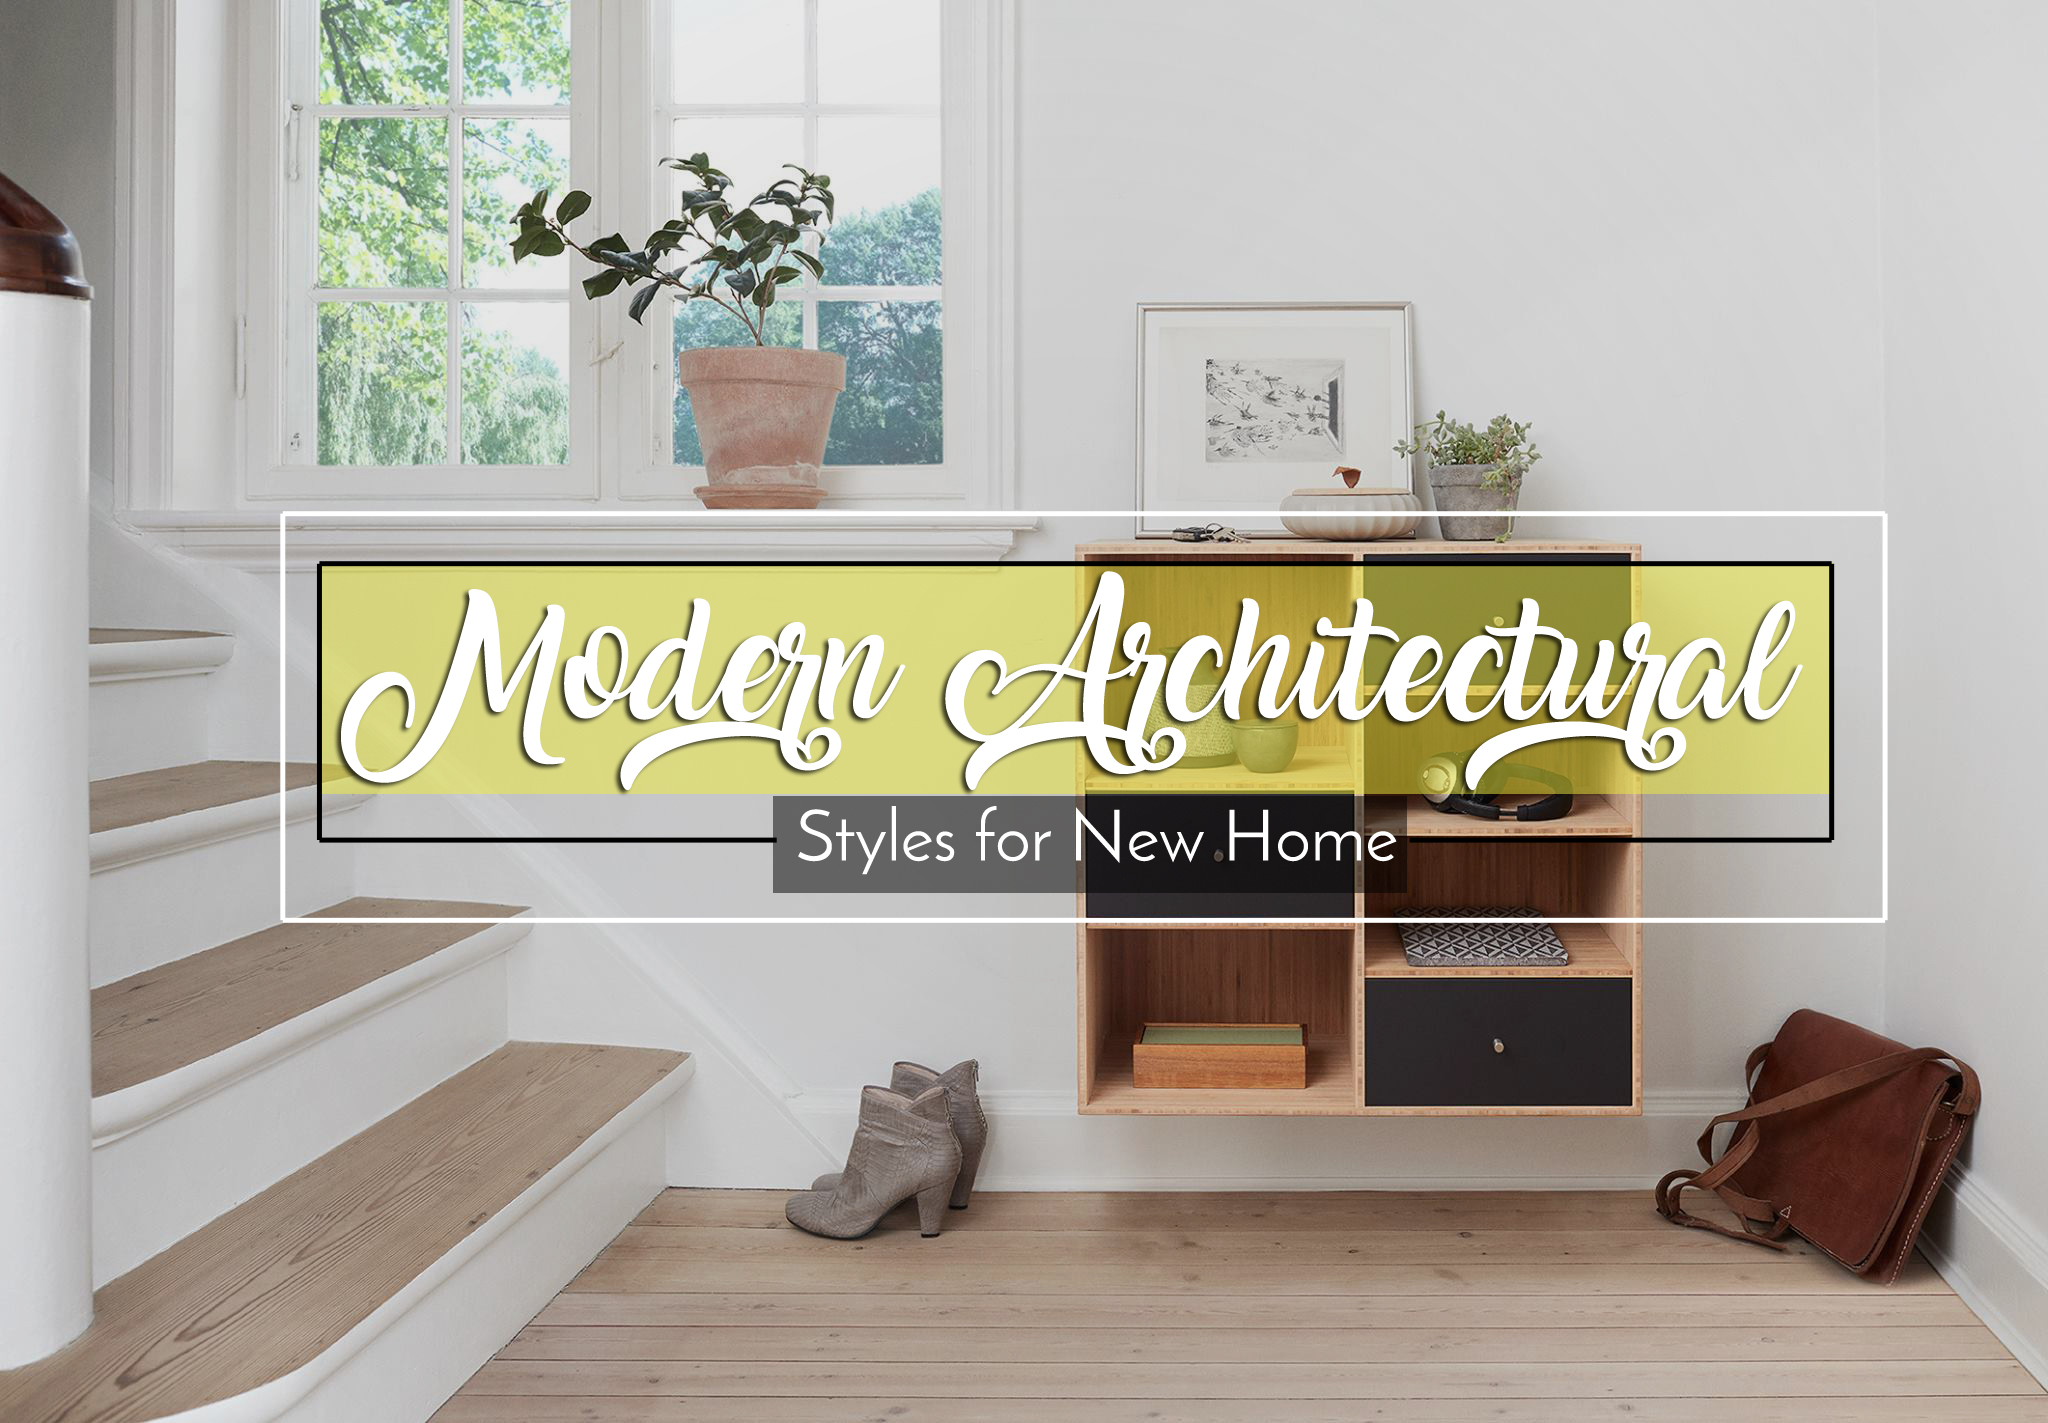 5 Modern Architectural Styles for New Homes